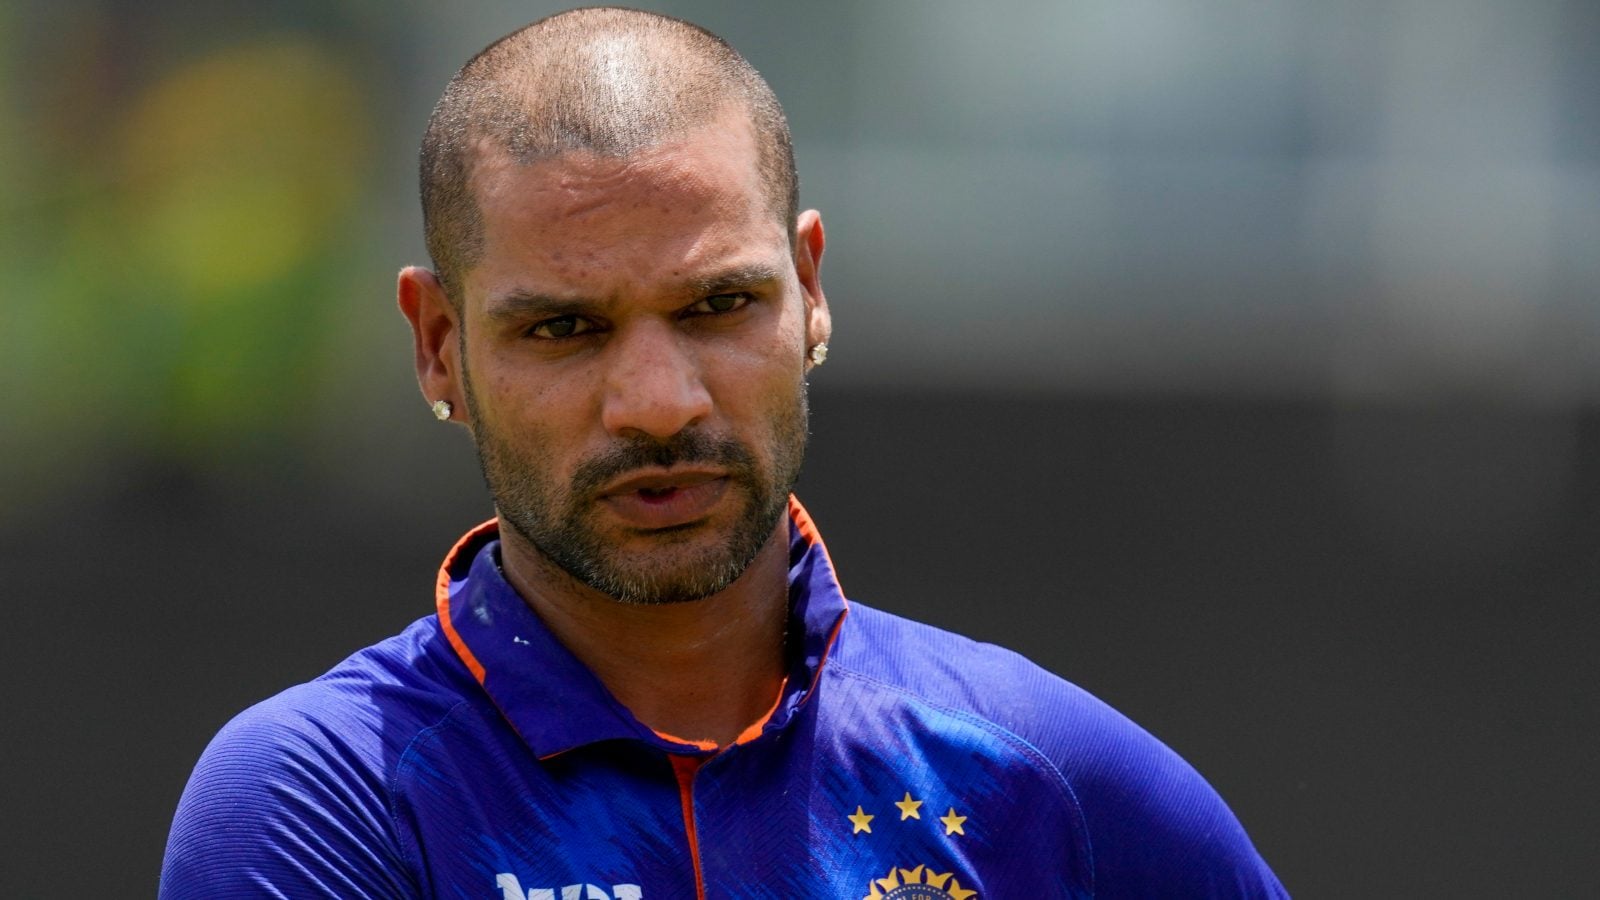 'One Small Change in The End' Shikhar Dhawan Reveals The Move That